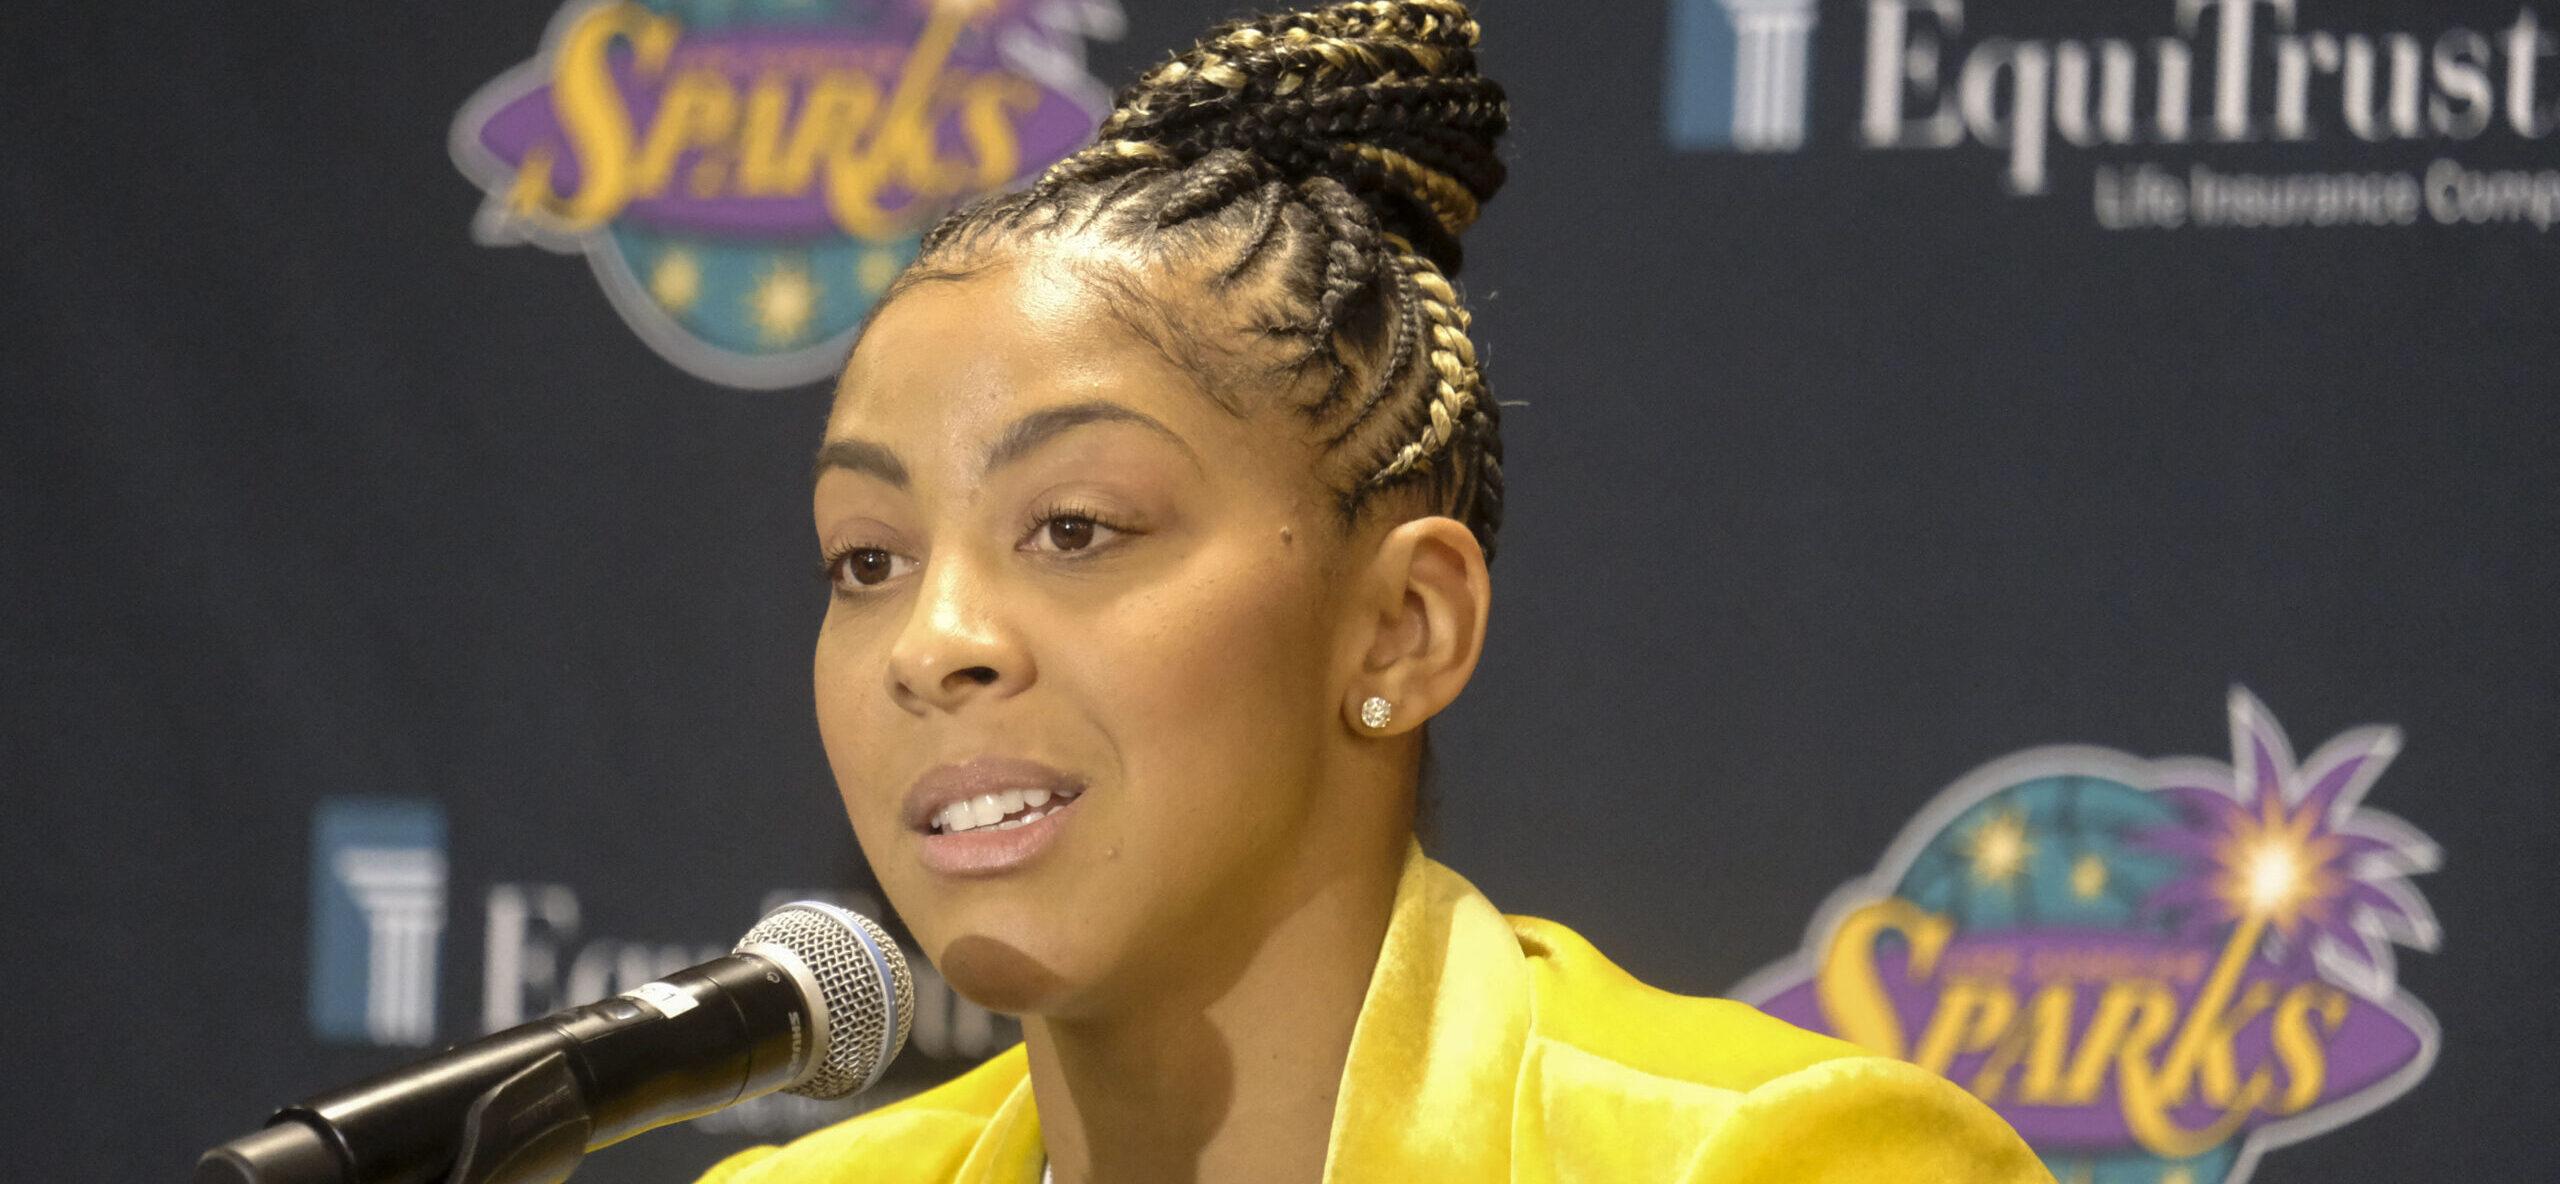 Candace Parker Bids Farewell To The Court After 16 Years In The WNBA